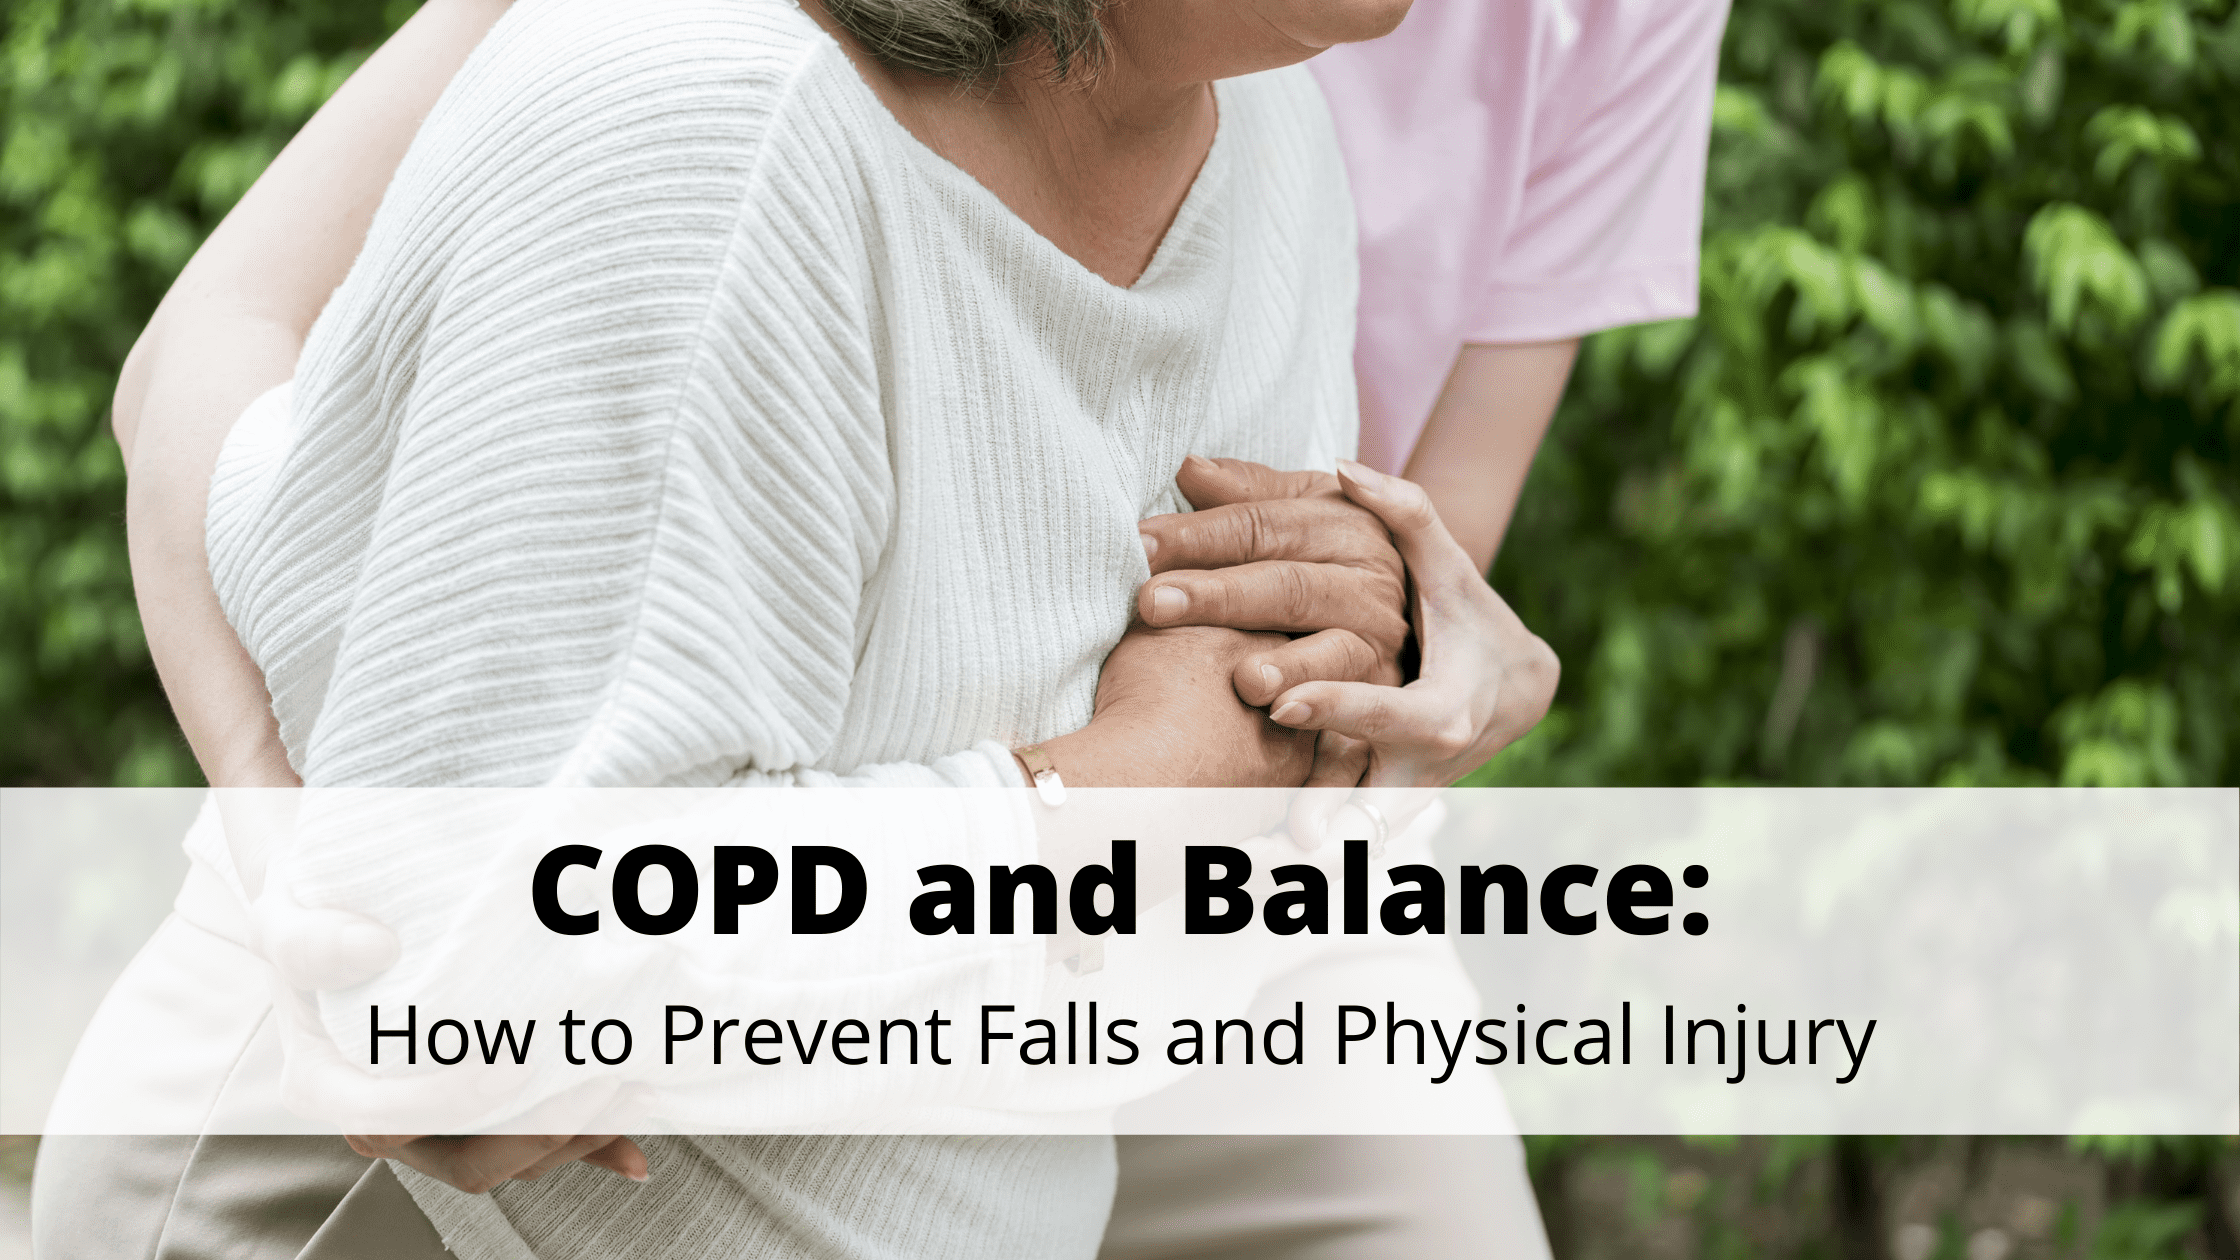 COPD and Balance: How to Prevent Falls and Physical Injury